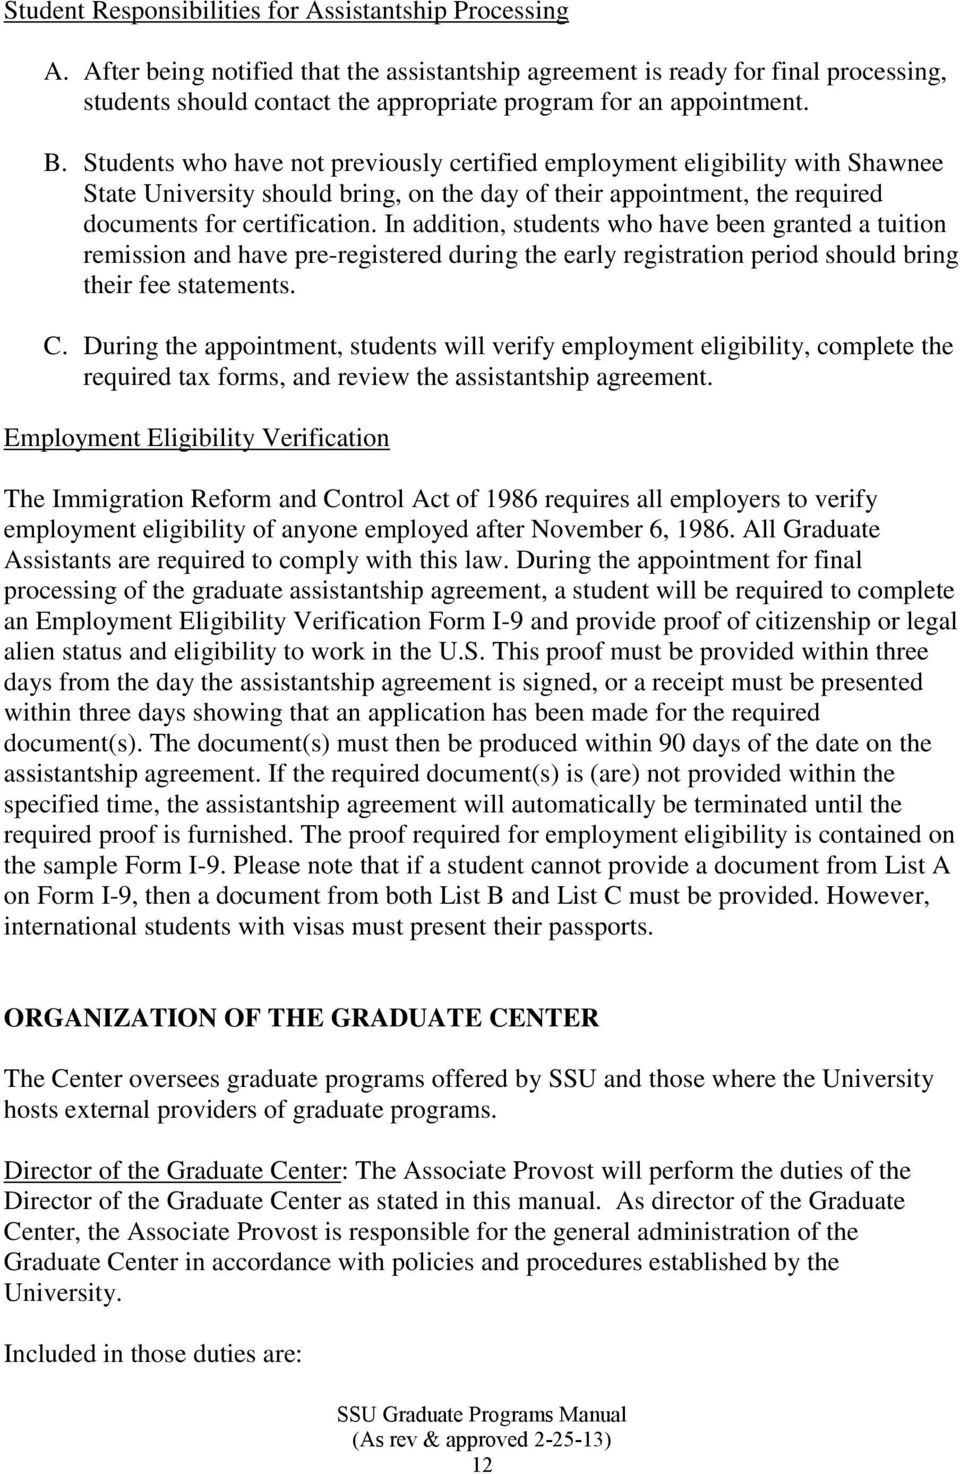 Students who have not previously certified employment eligibility with Shawnee State University should bring, on the day of their appointment, the required documents for certification.